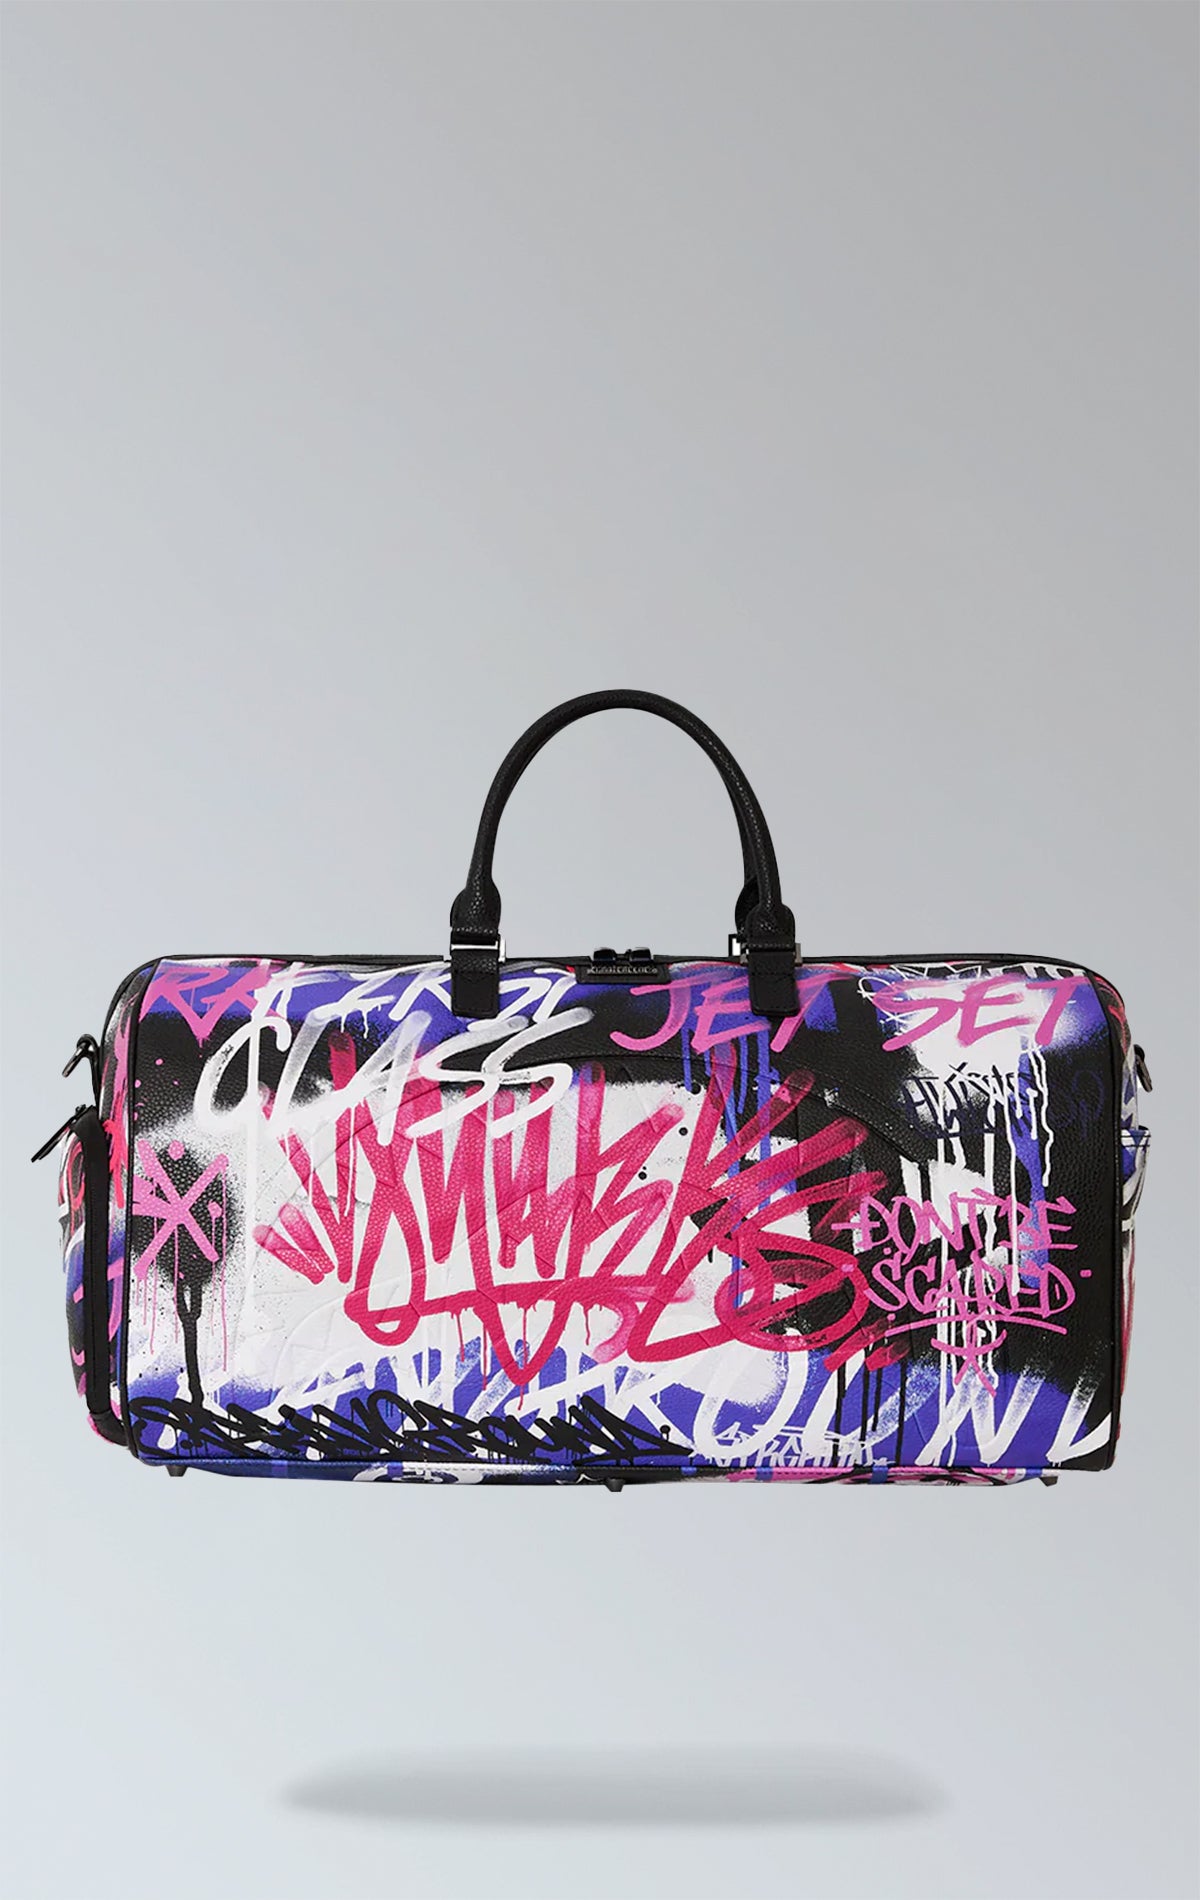 Purple duffle bag with Vandal Couture design, featuring multiple compartments including a metal zipper pocket, back zippers, and a zippered sneaker pocket. It has gold zippers, adjustable straps, and metal hardware. Made from durable water-resistant vegan leather.